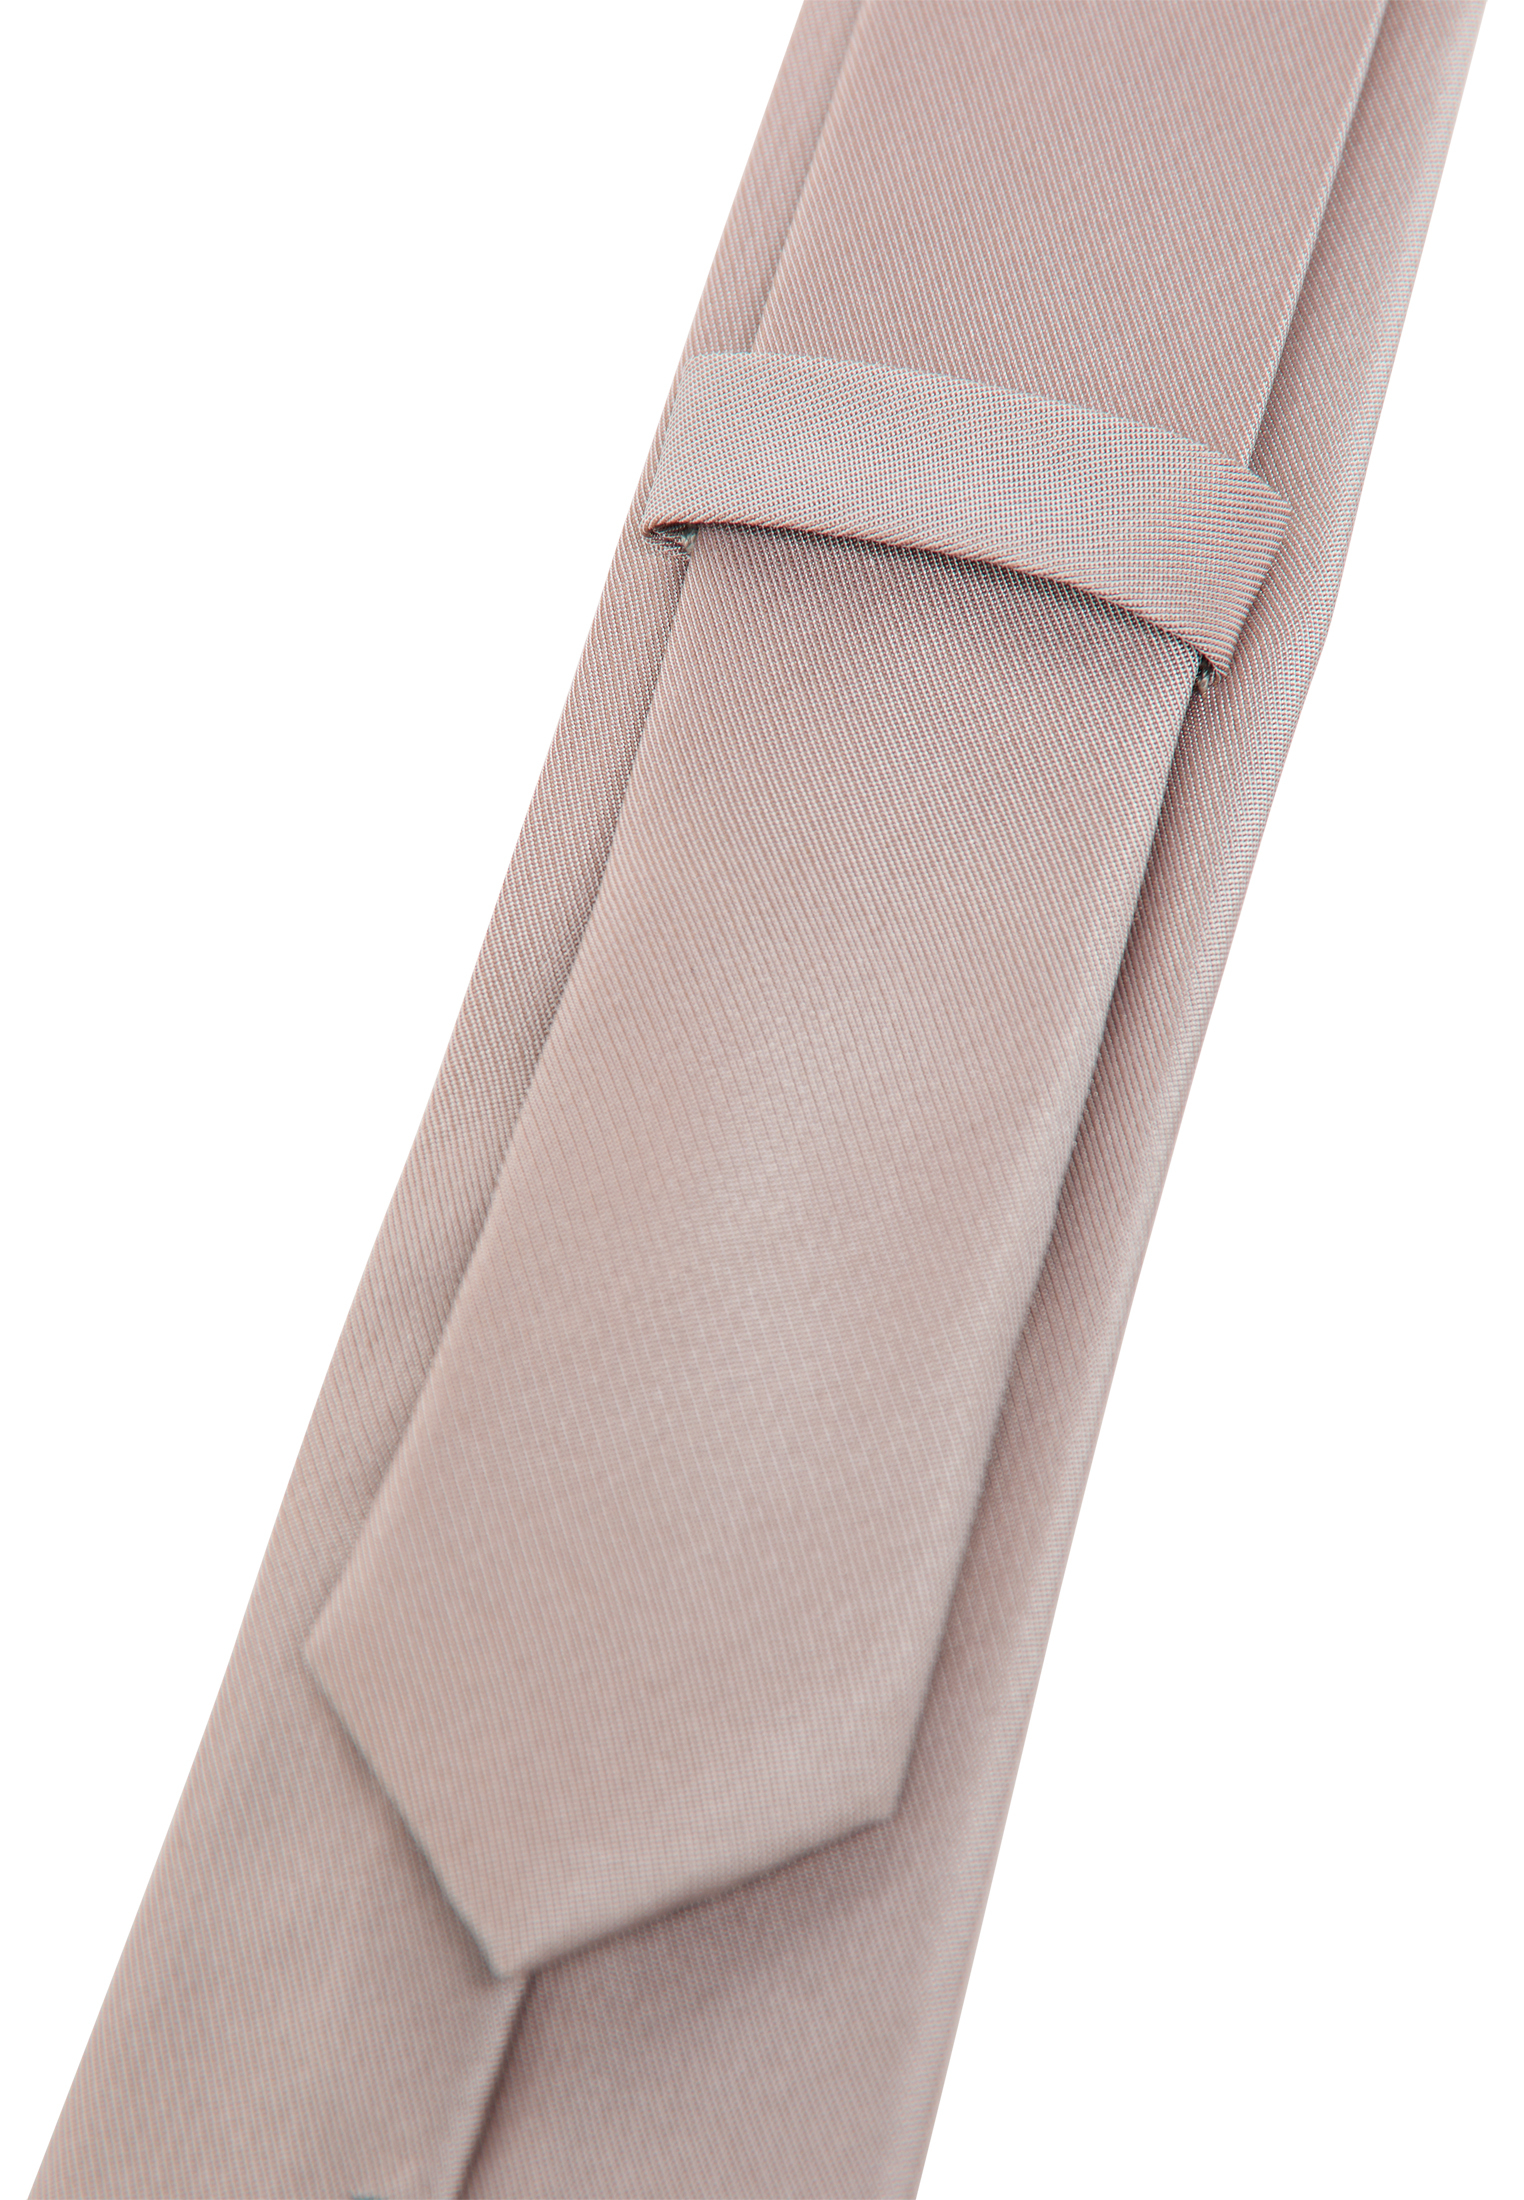 Tie in taupe plain